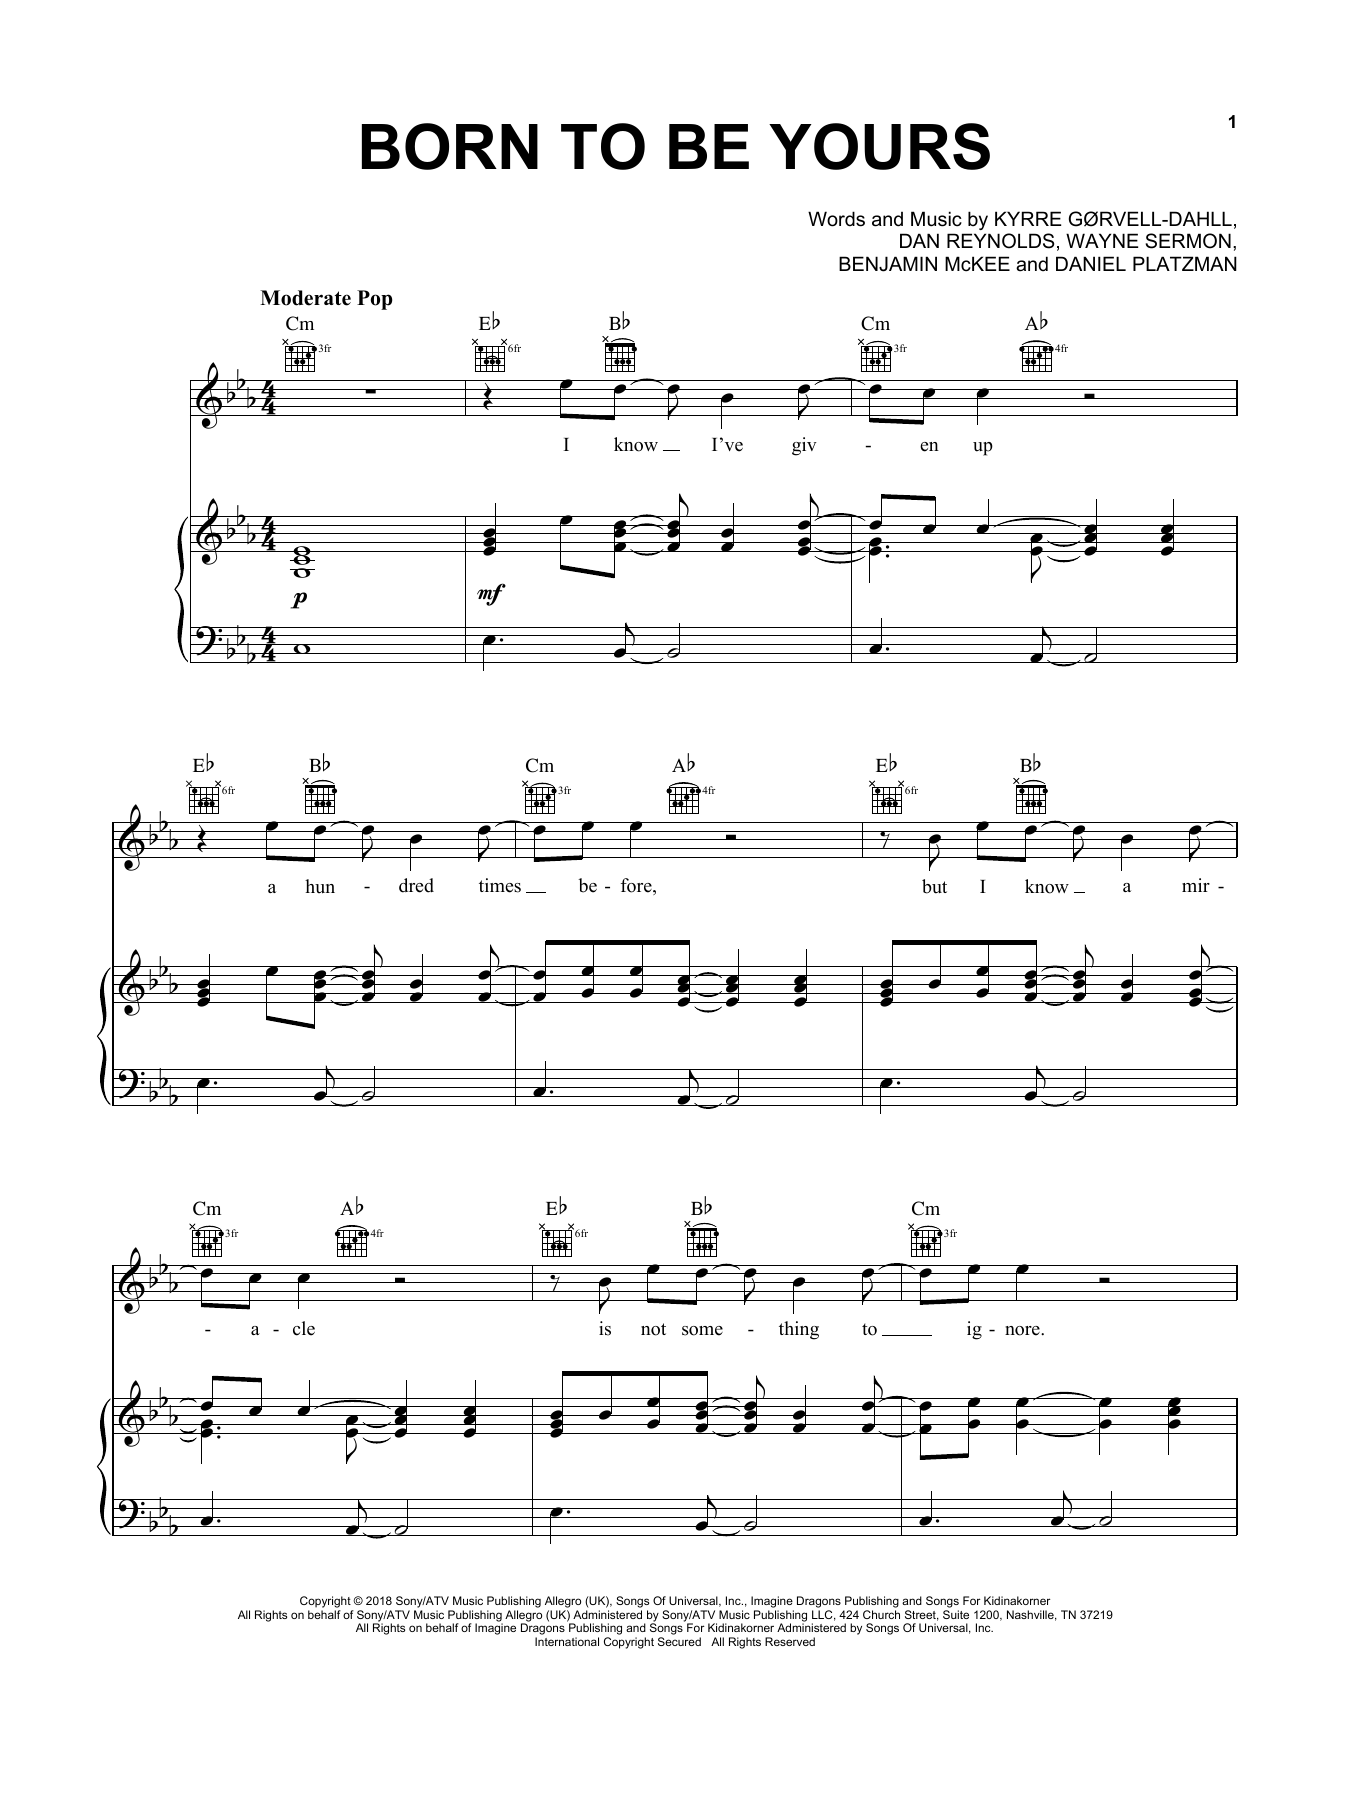 Kygo & Imagine Dragons Born To Be Yours sheet music notes and chords. Download Printable PDF.